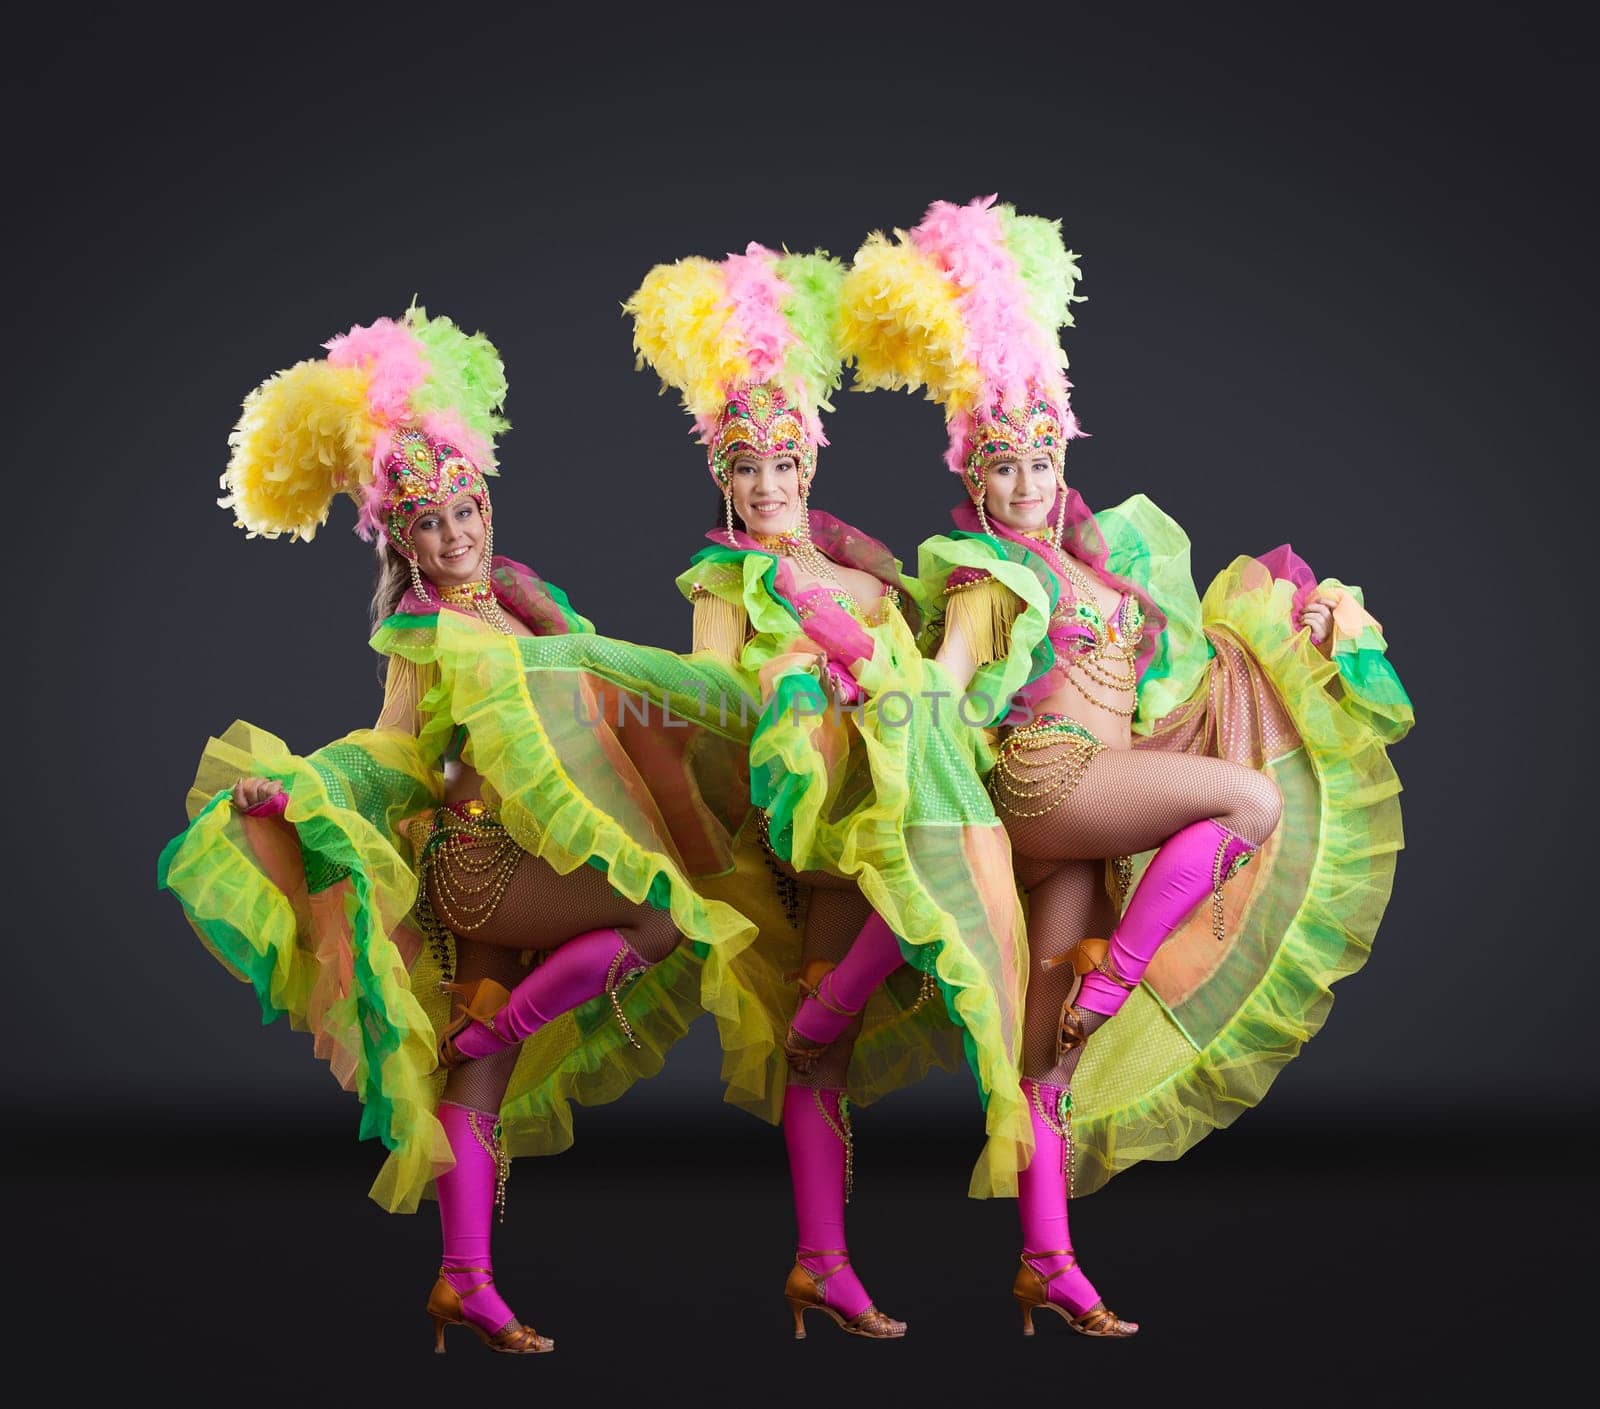 Fascinating dancers in colorful carnival costumes by rivertime